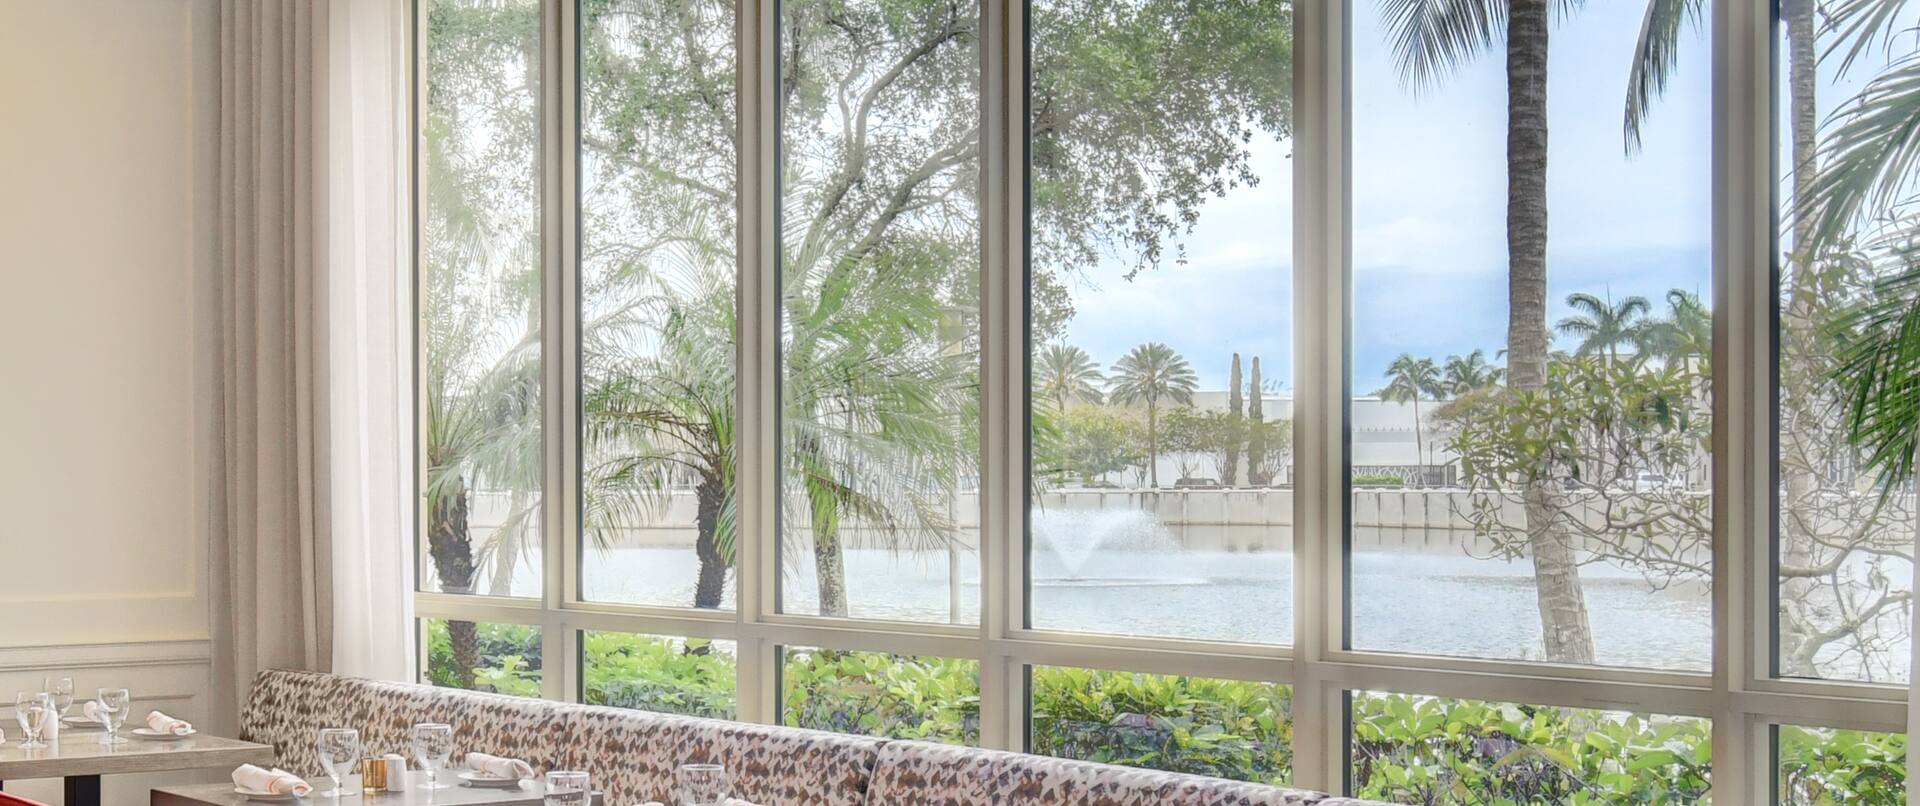 Lakefront Terrace Grille dining room and window view